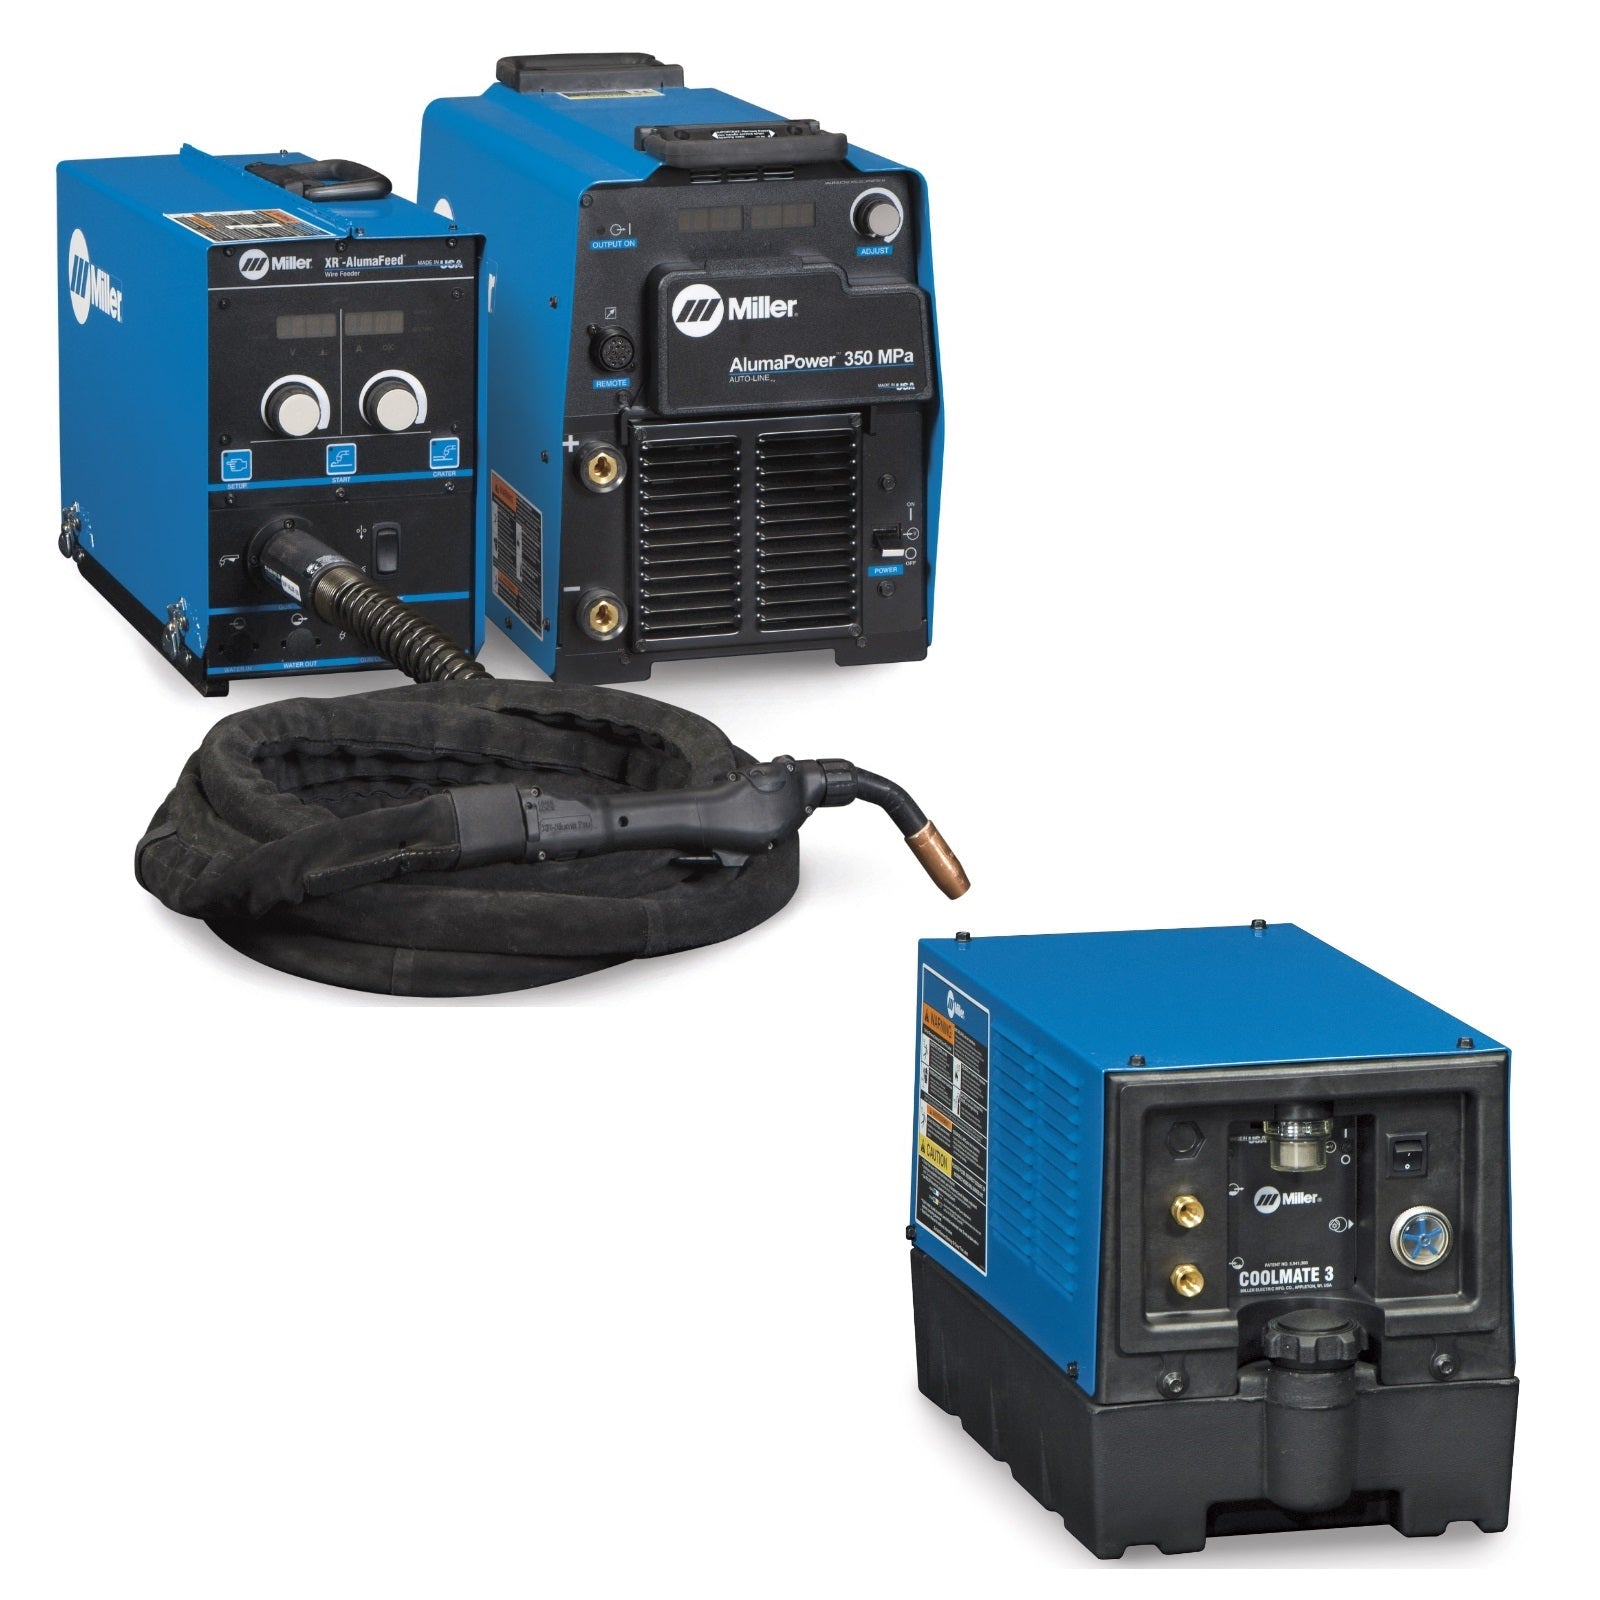 Miller AlumaPower 350 MPa MIG Welder with Aux Power, and Accessory Package (951551)